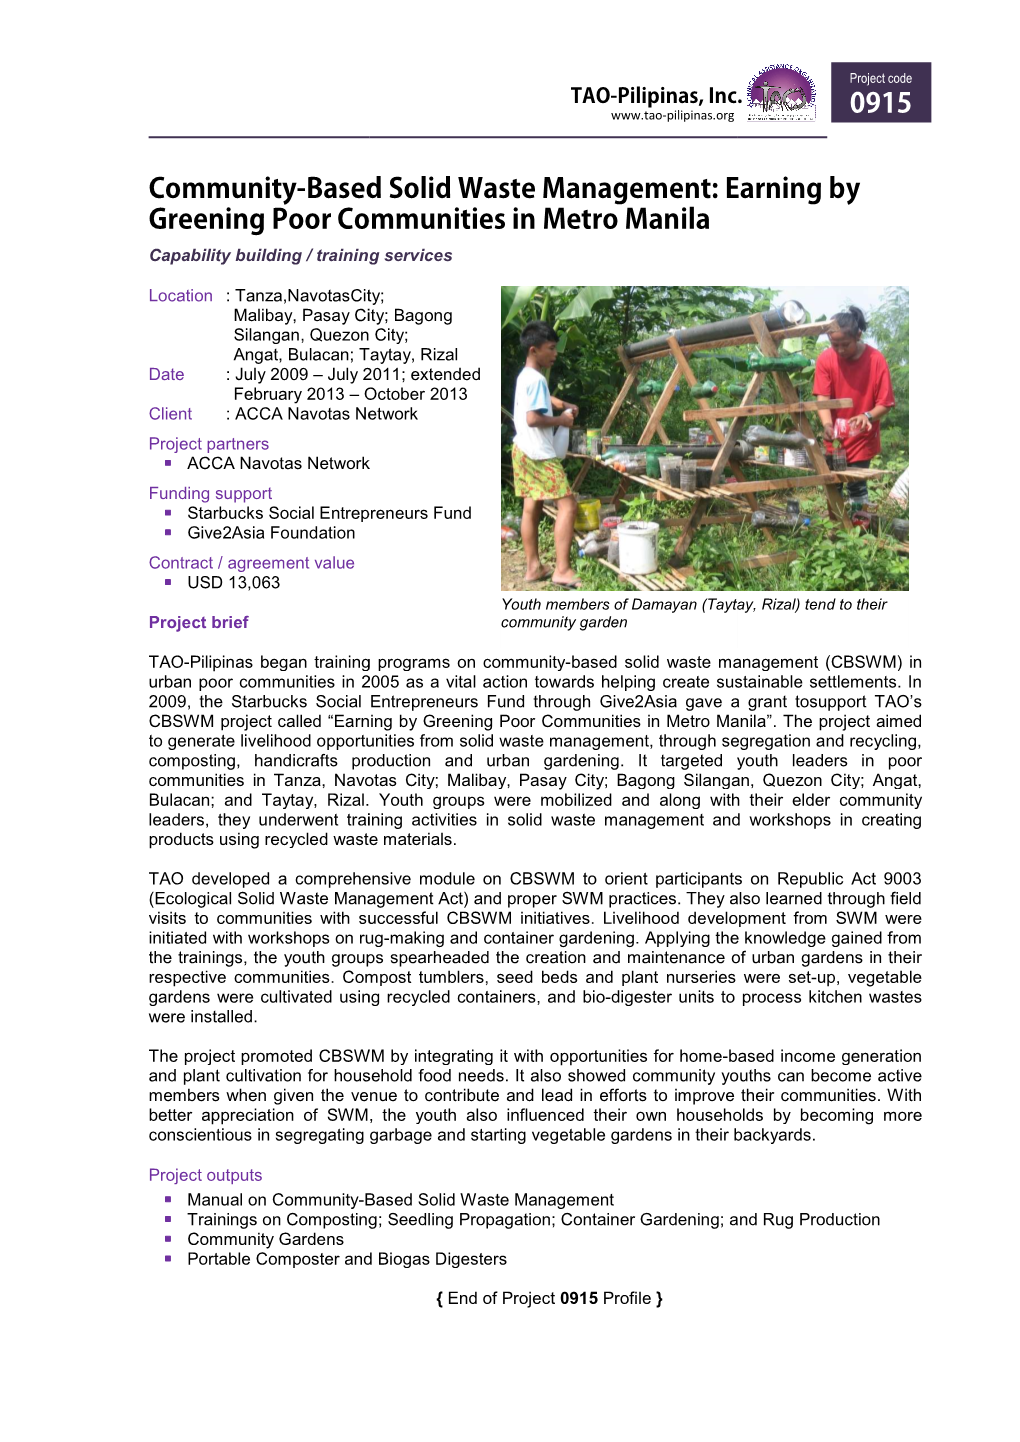 Community-Based Solid Waste Management: Earning by Greening Poor Communities in Metro Manila Capability Building / Training Services